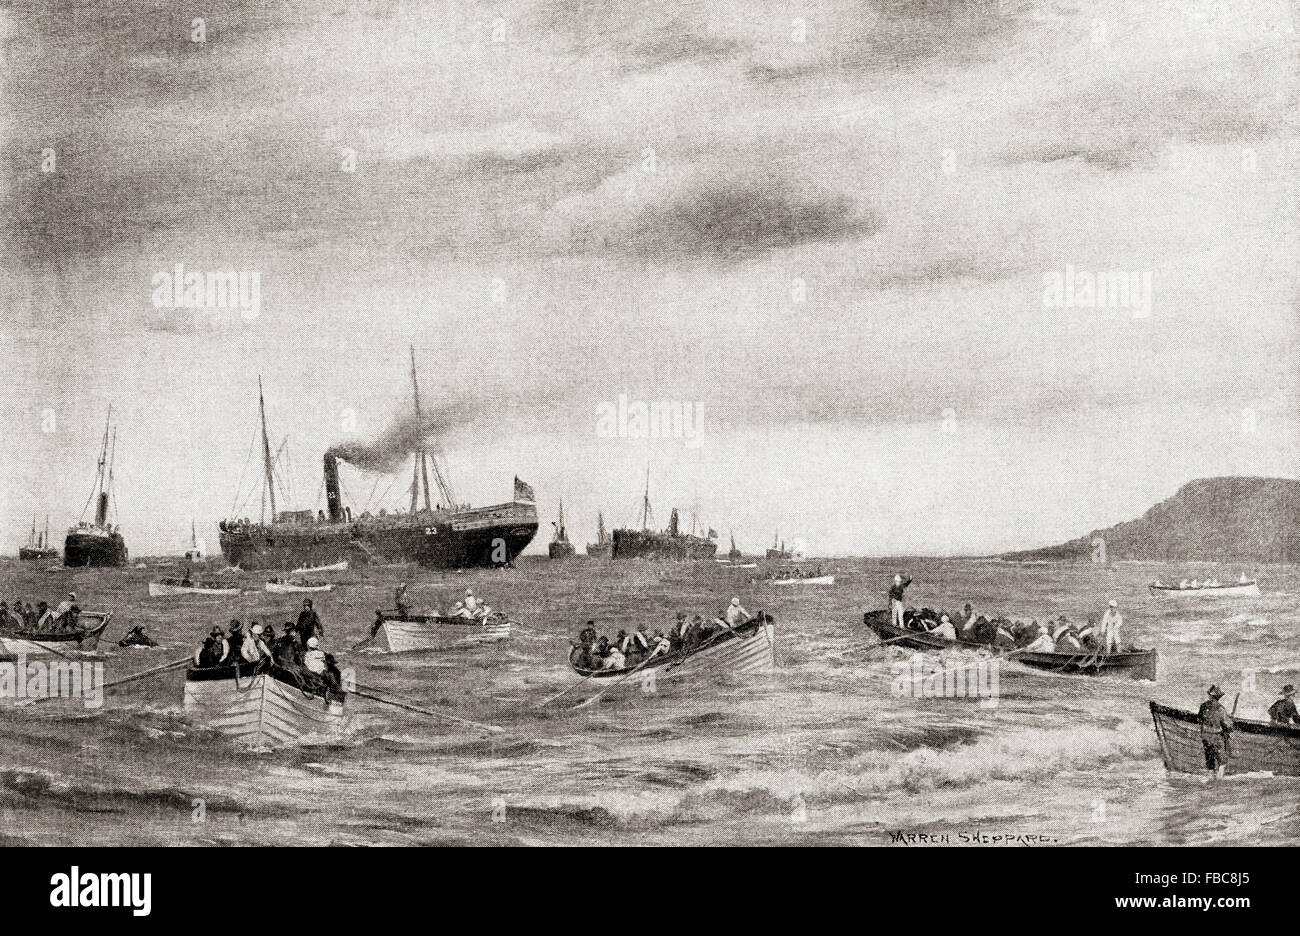 The landing of United States troops from transports at Daiquiri, Cuba at the start of the Spanish-American war in 1898. Stock Photo